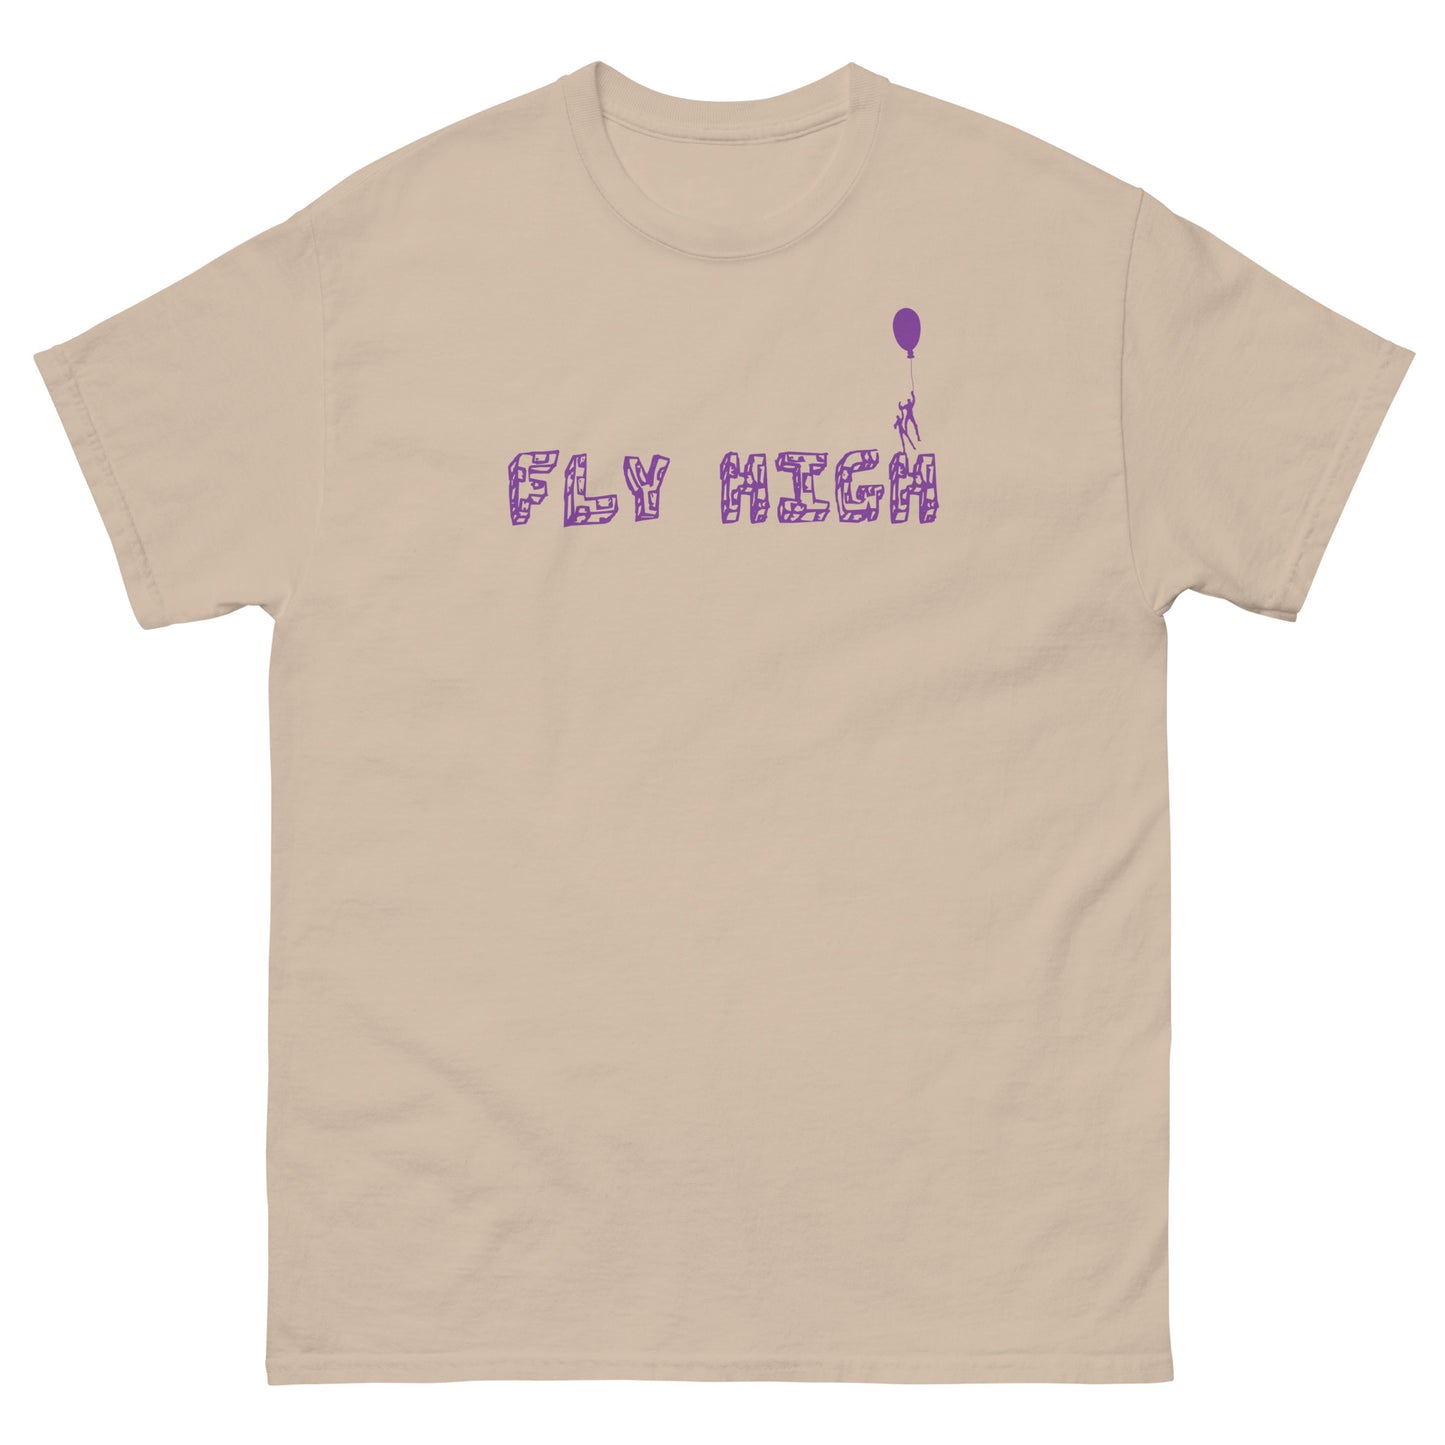 Fly High graphic T-Shirt